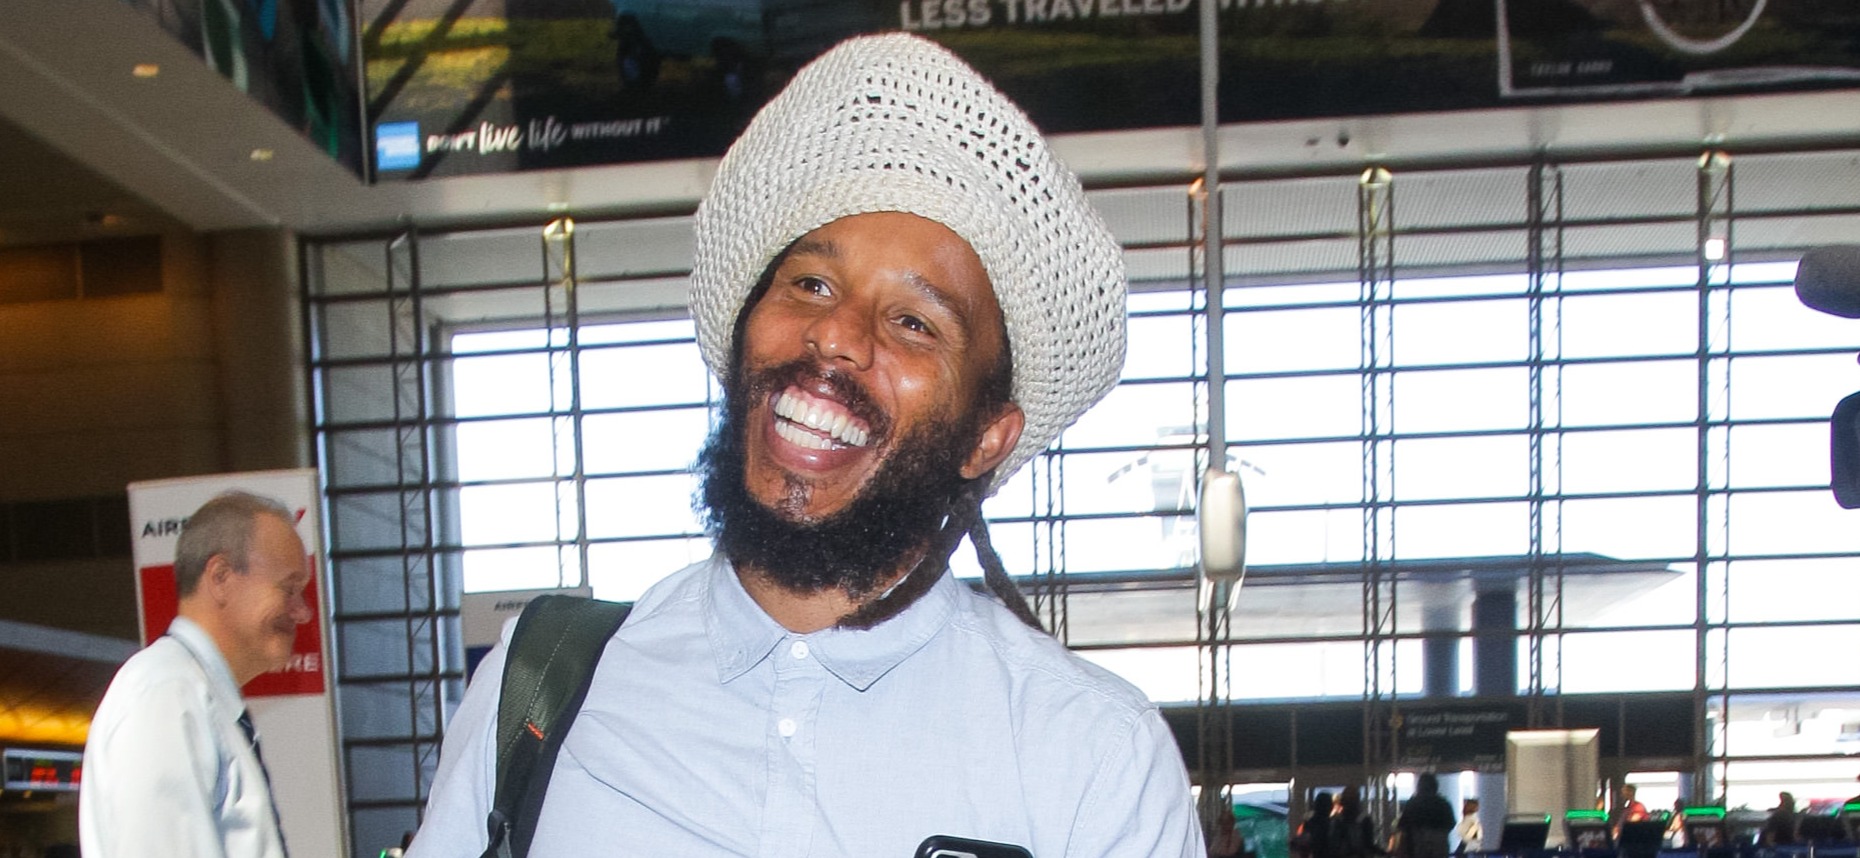 Ziggy Marley Excited To Celebrate Son's Birthday With Donuts